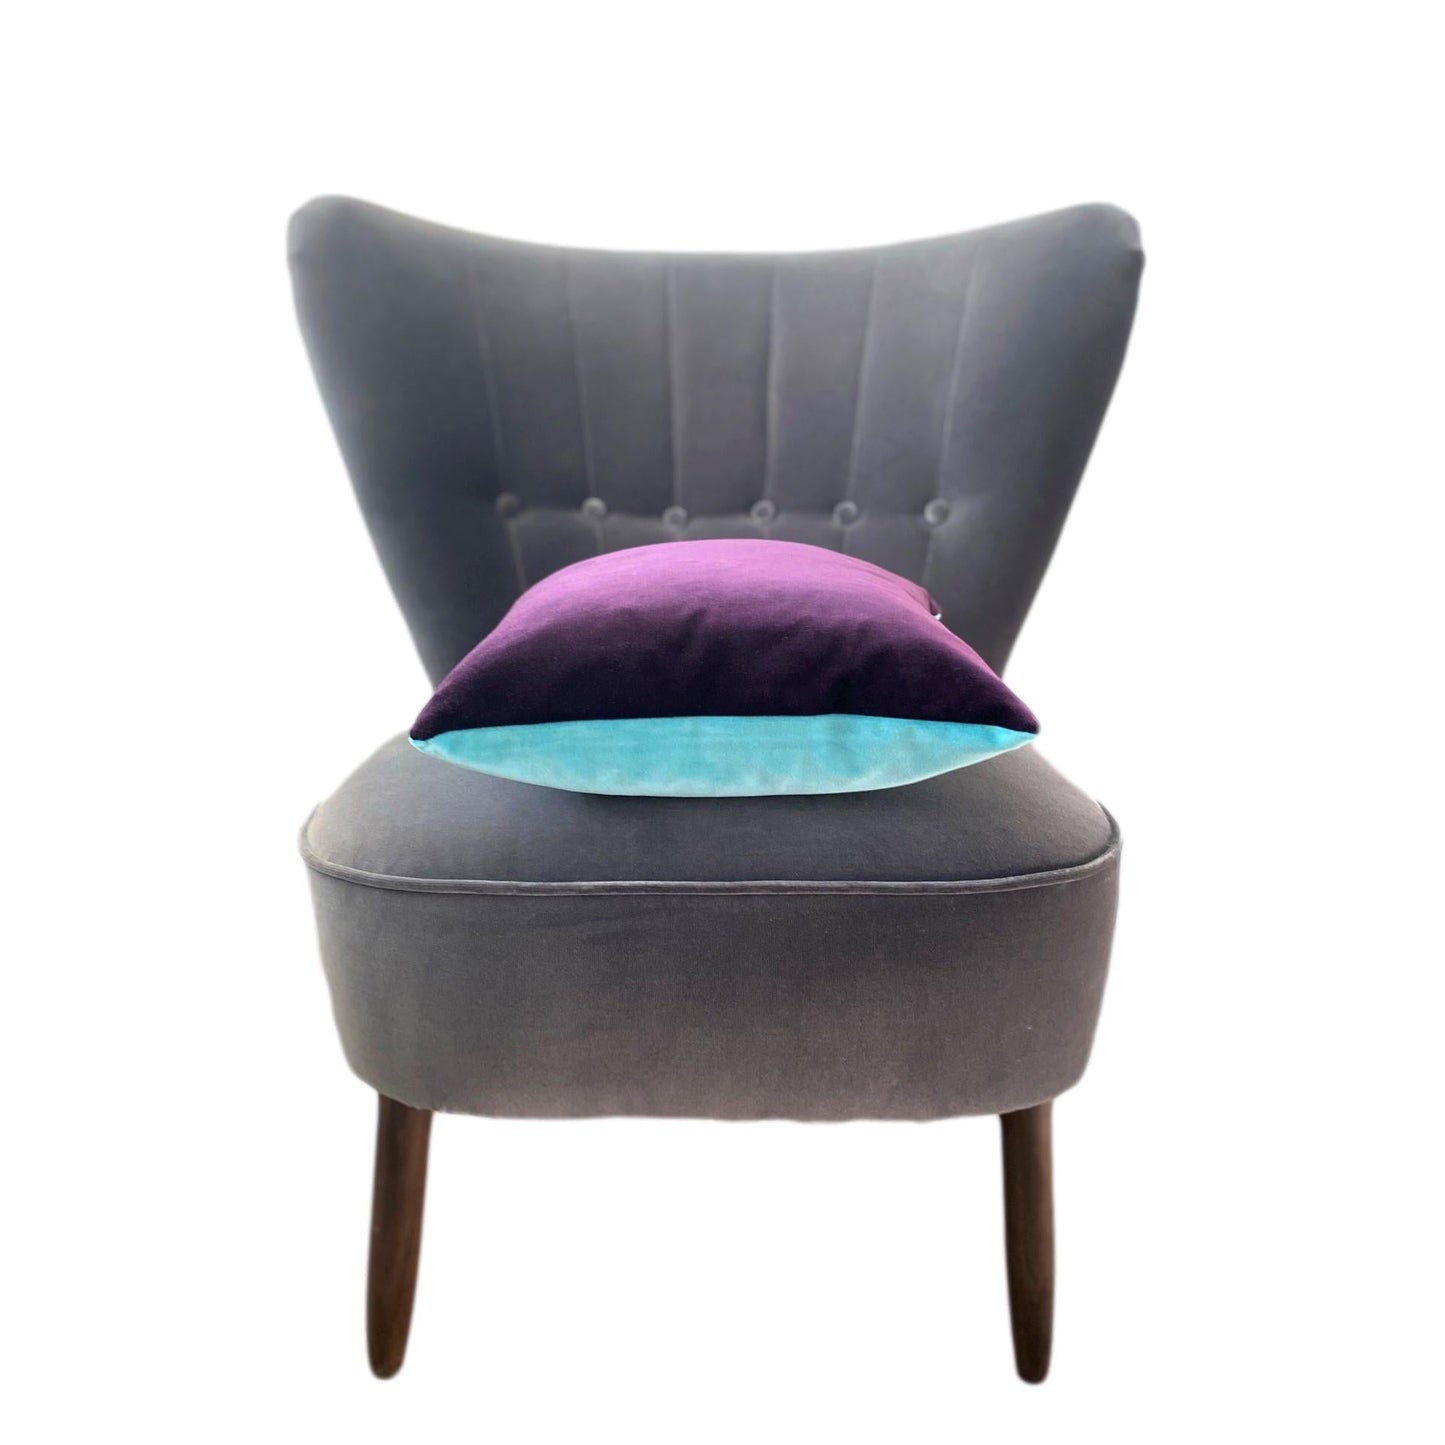 Plum coloured cushion with turquoise by luxe 39